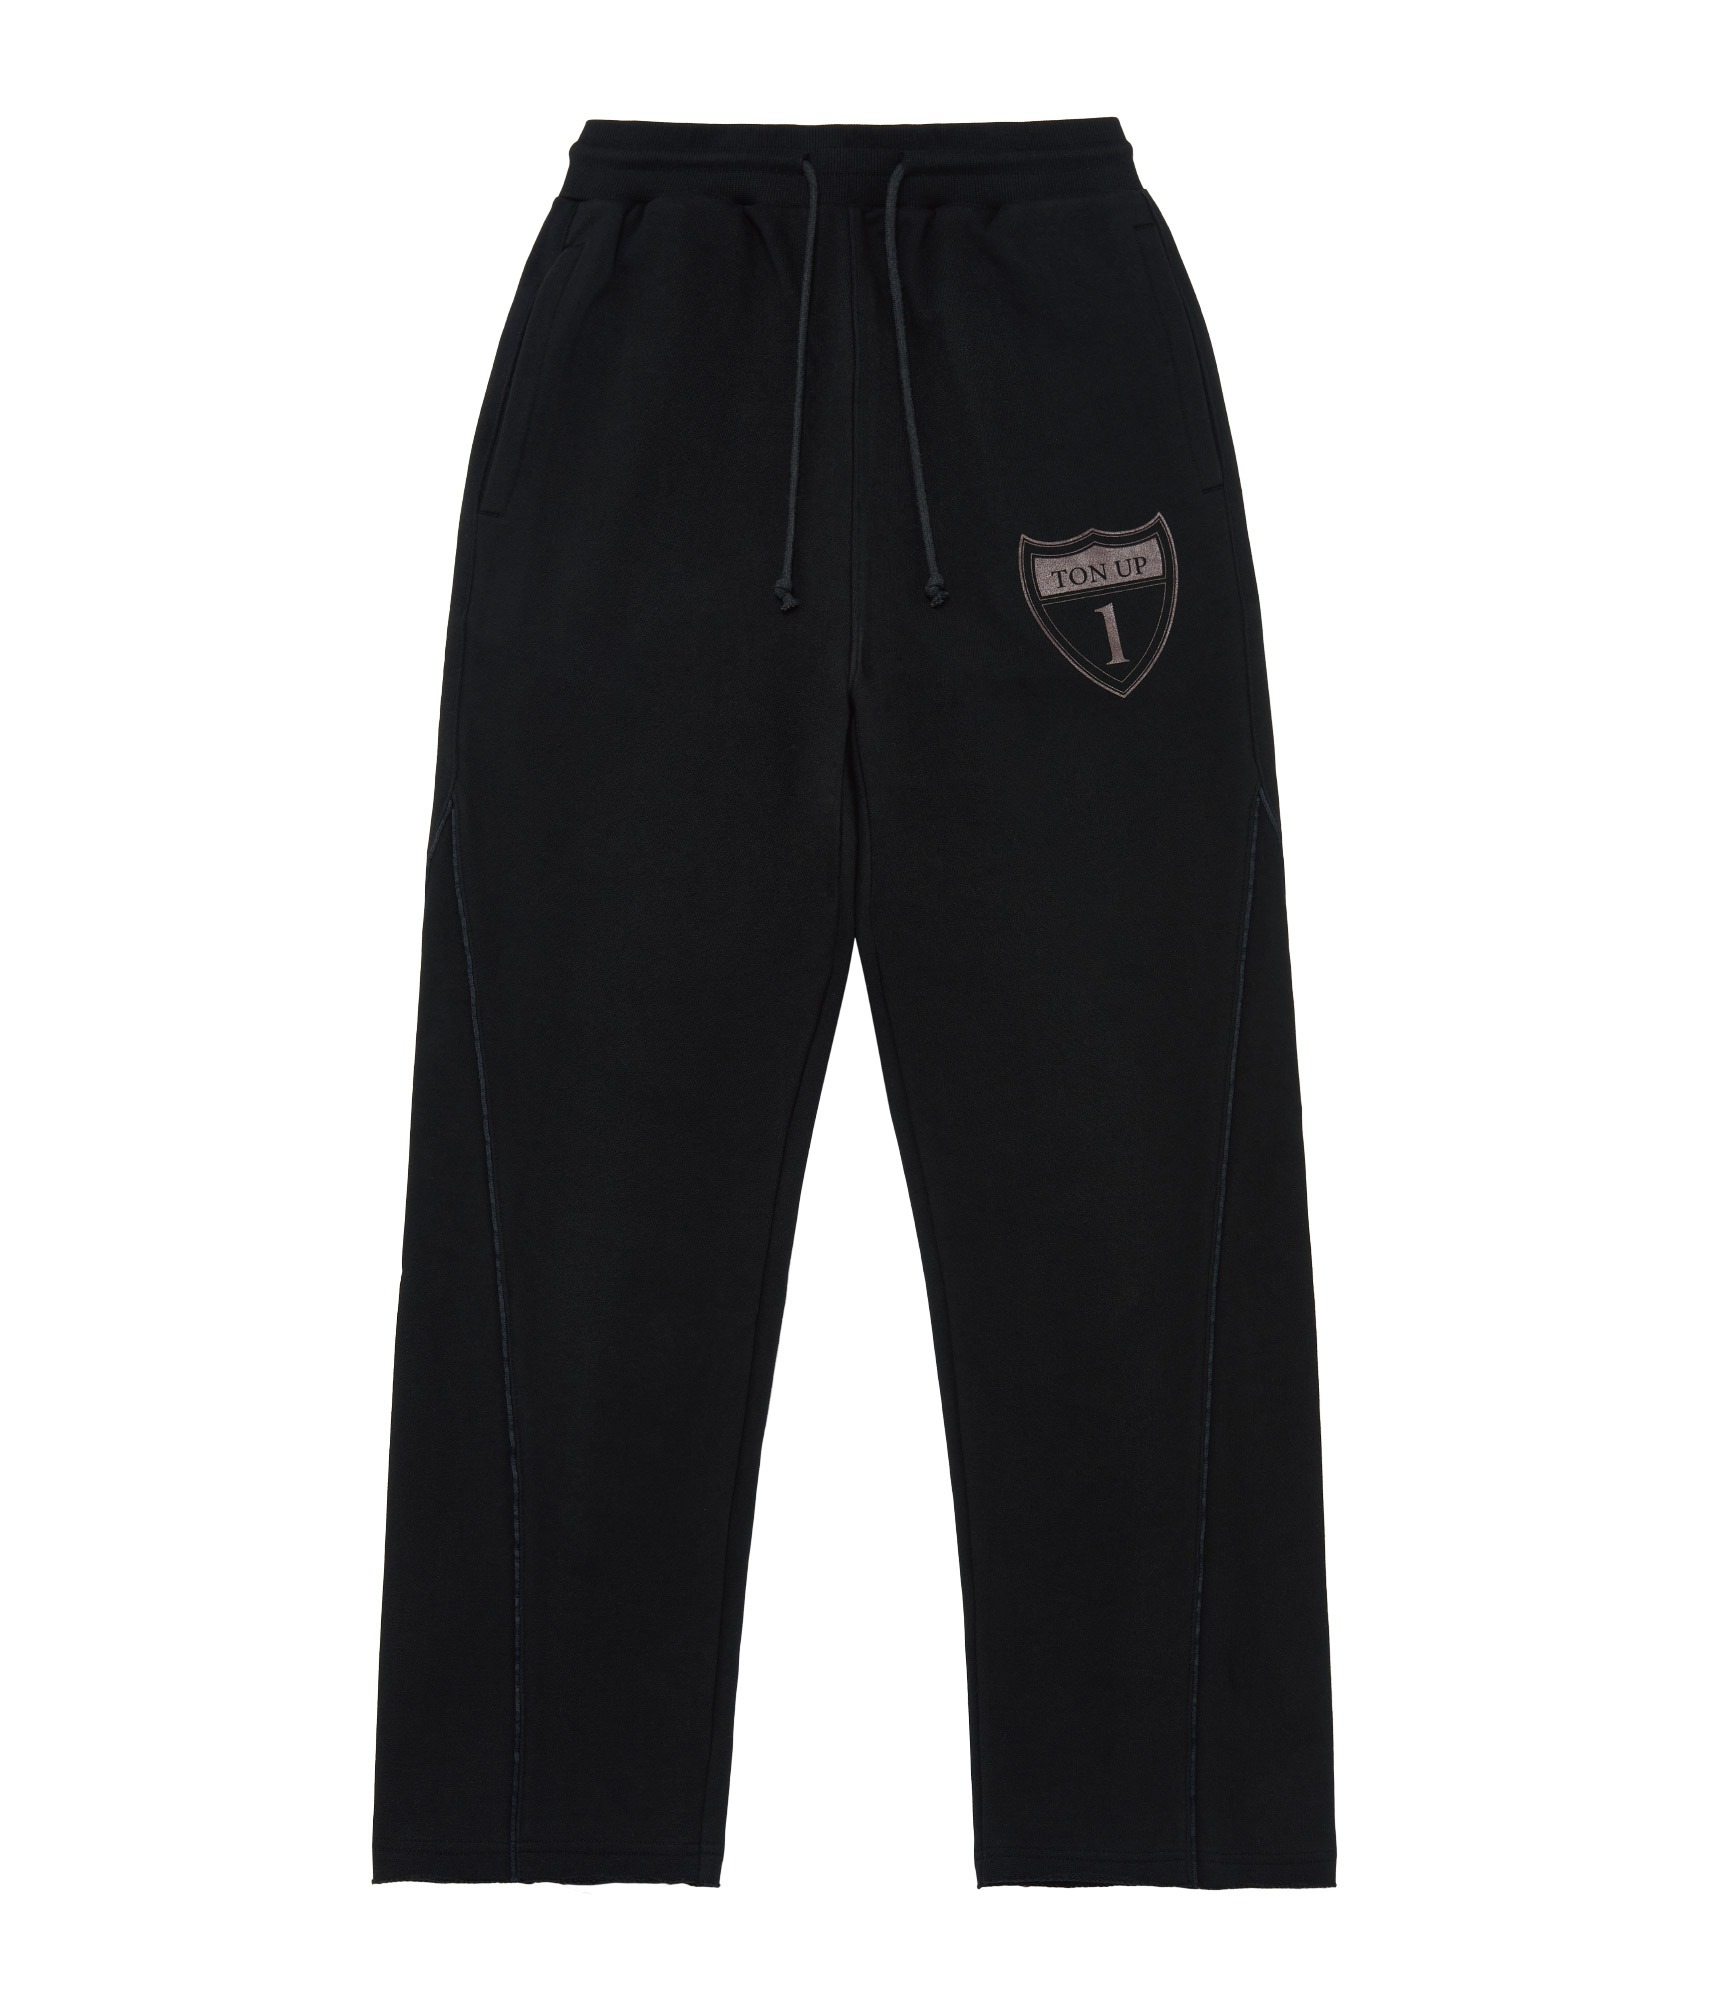 CURVED TON UP SWEAT PANTS (BLACK)